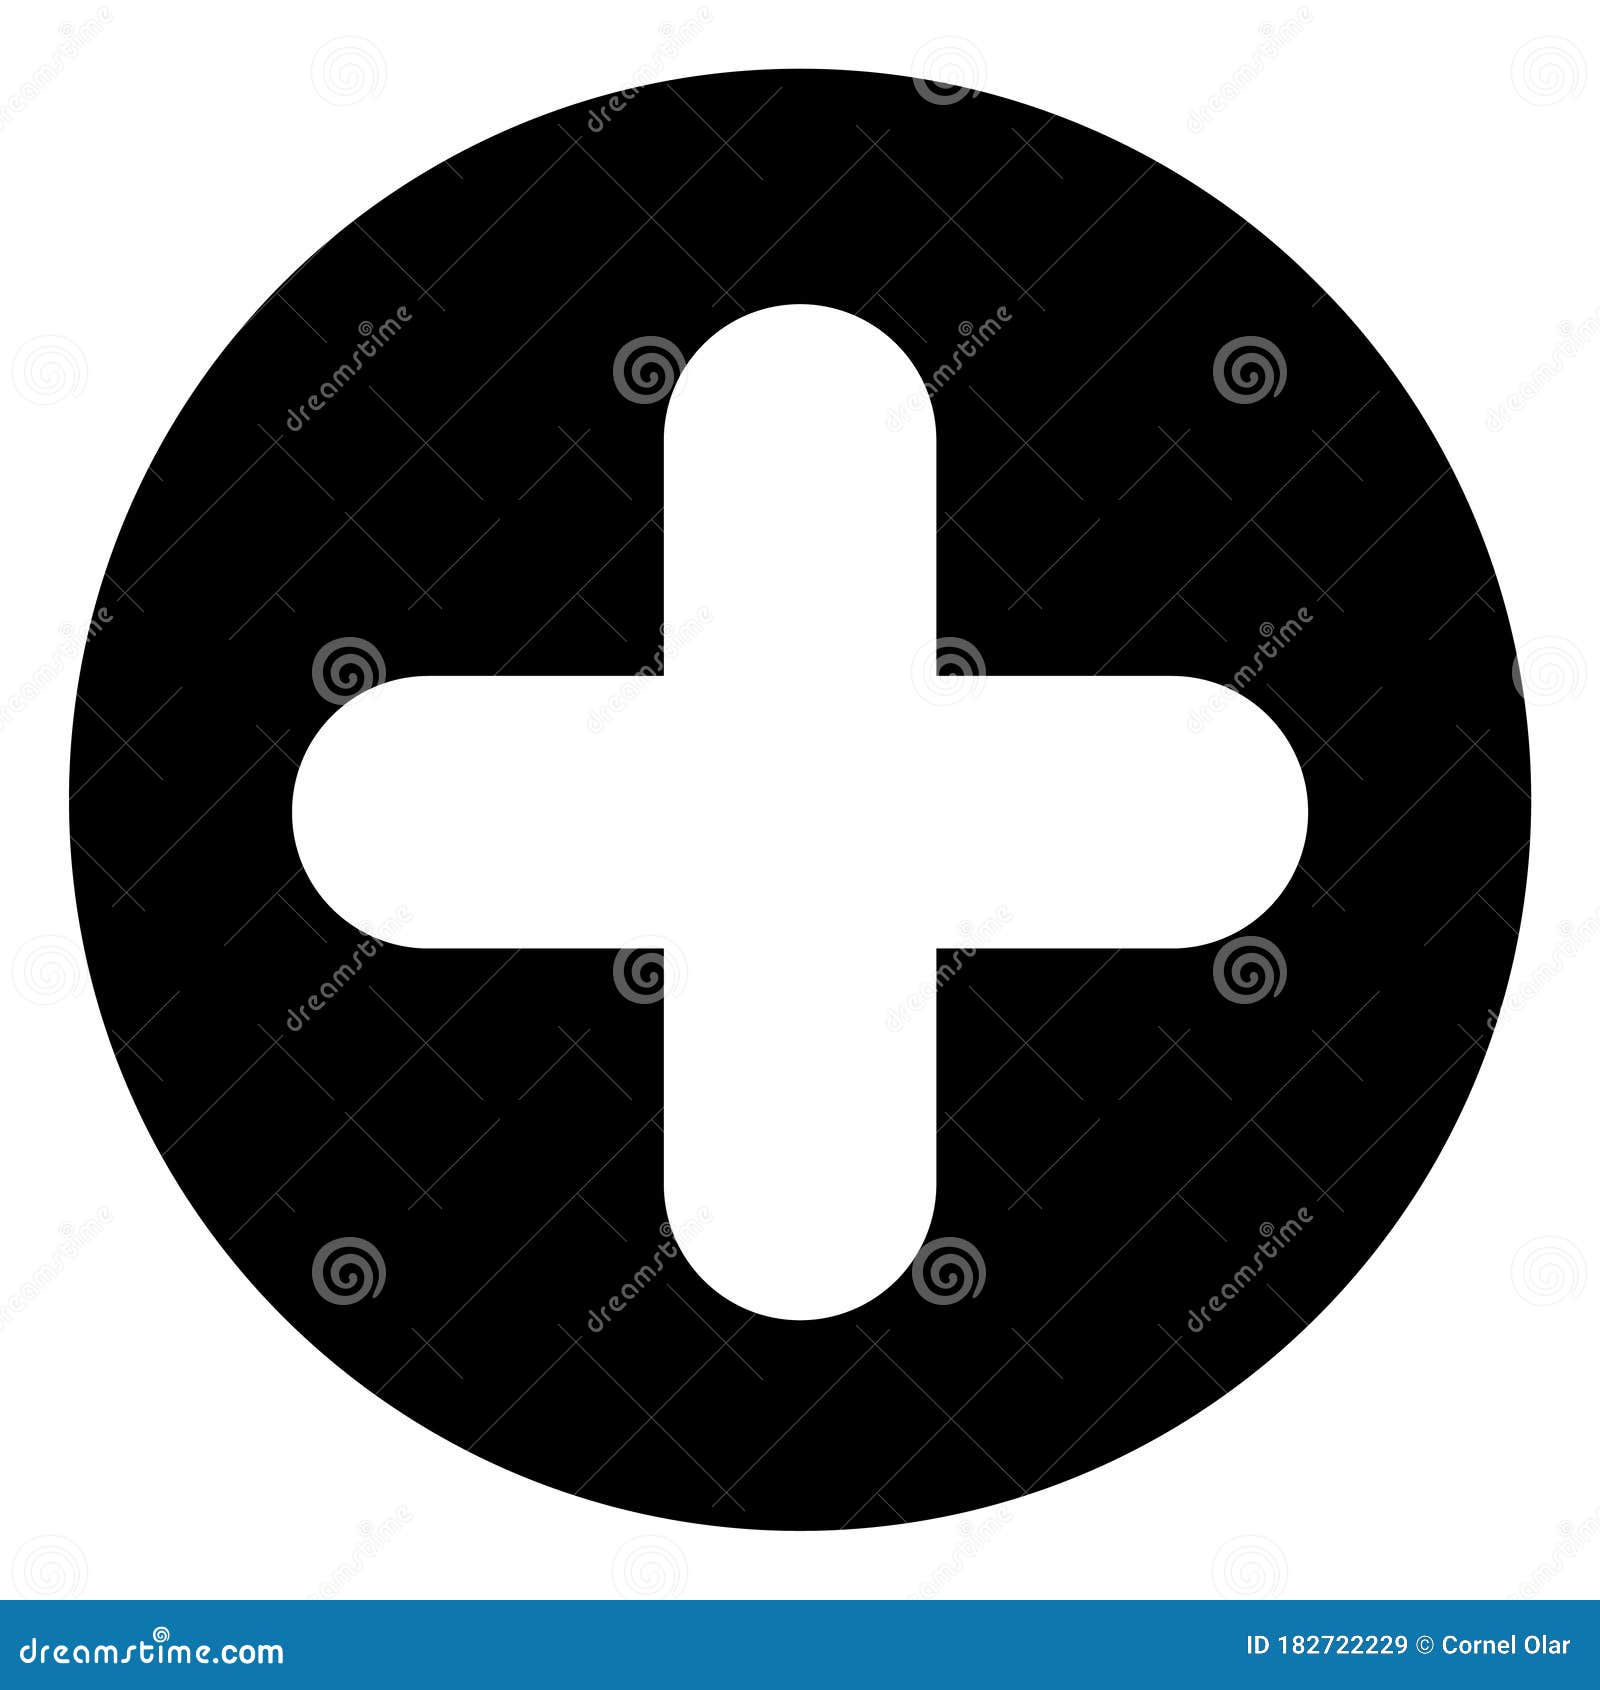 Black Cross Medical Sign Black and White Vector Stock Image ...